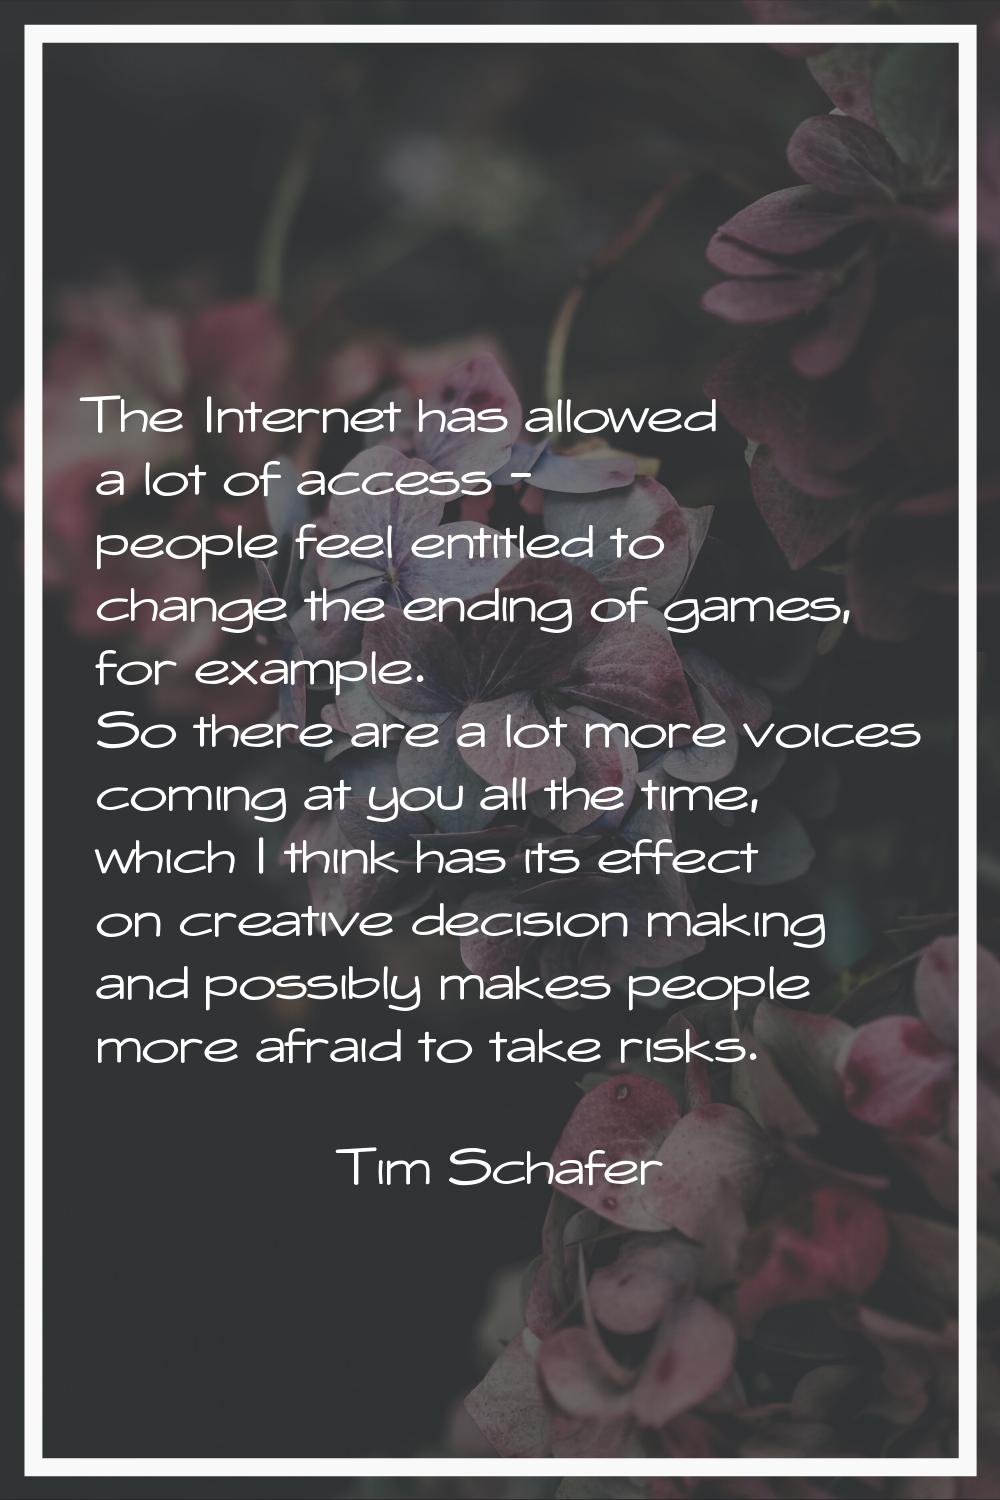 The Internet has allowed a lot of access - people feel entitled to change the ending of games, for 